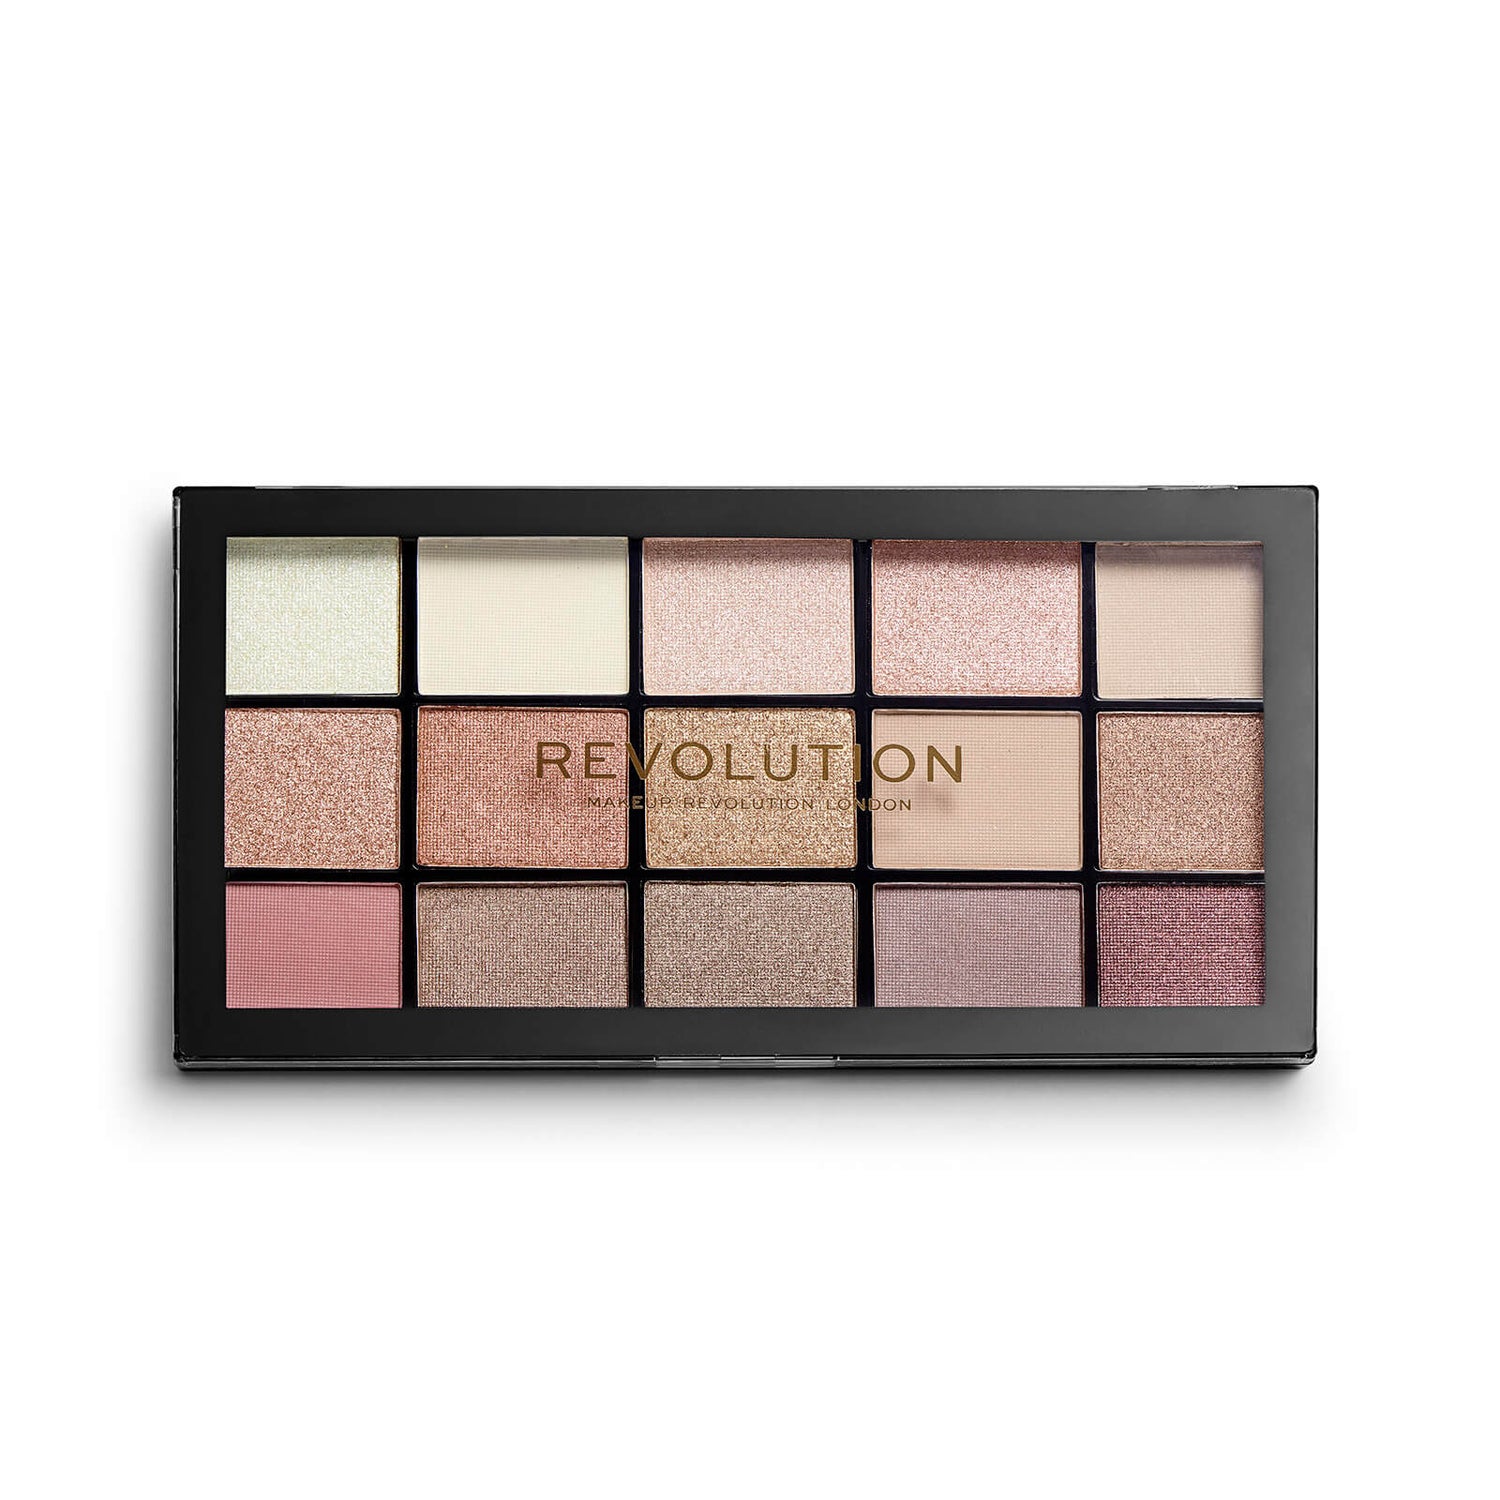 Makeup Revolution Reloaded Eye Shadow Palette - Iconic 3.0